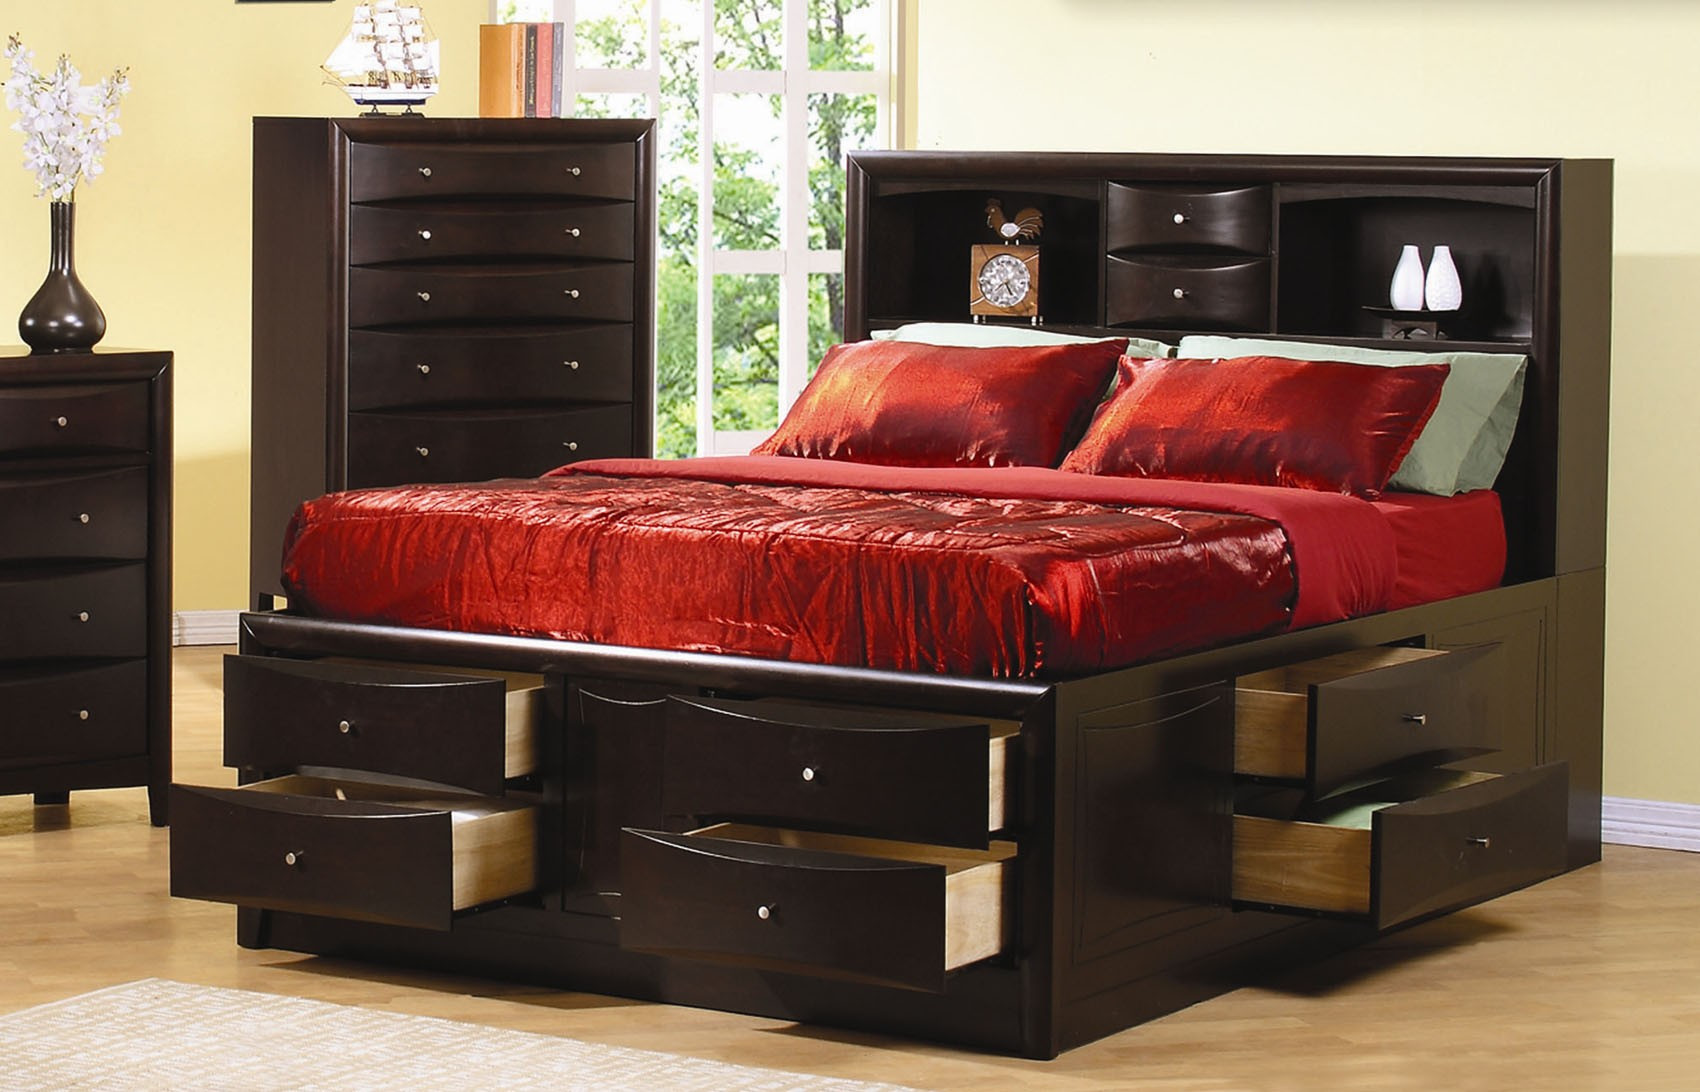 Storage Bed Bedroom Set
 A Lot of Bedroom Storage Ideas for the Better yet Well